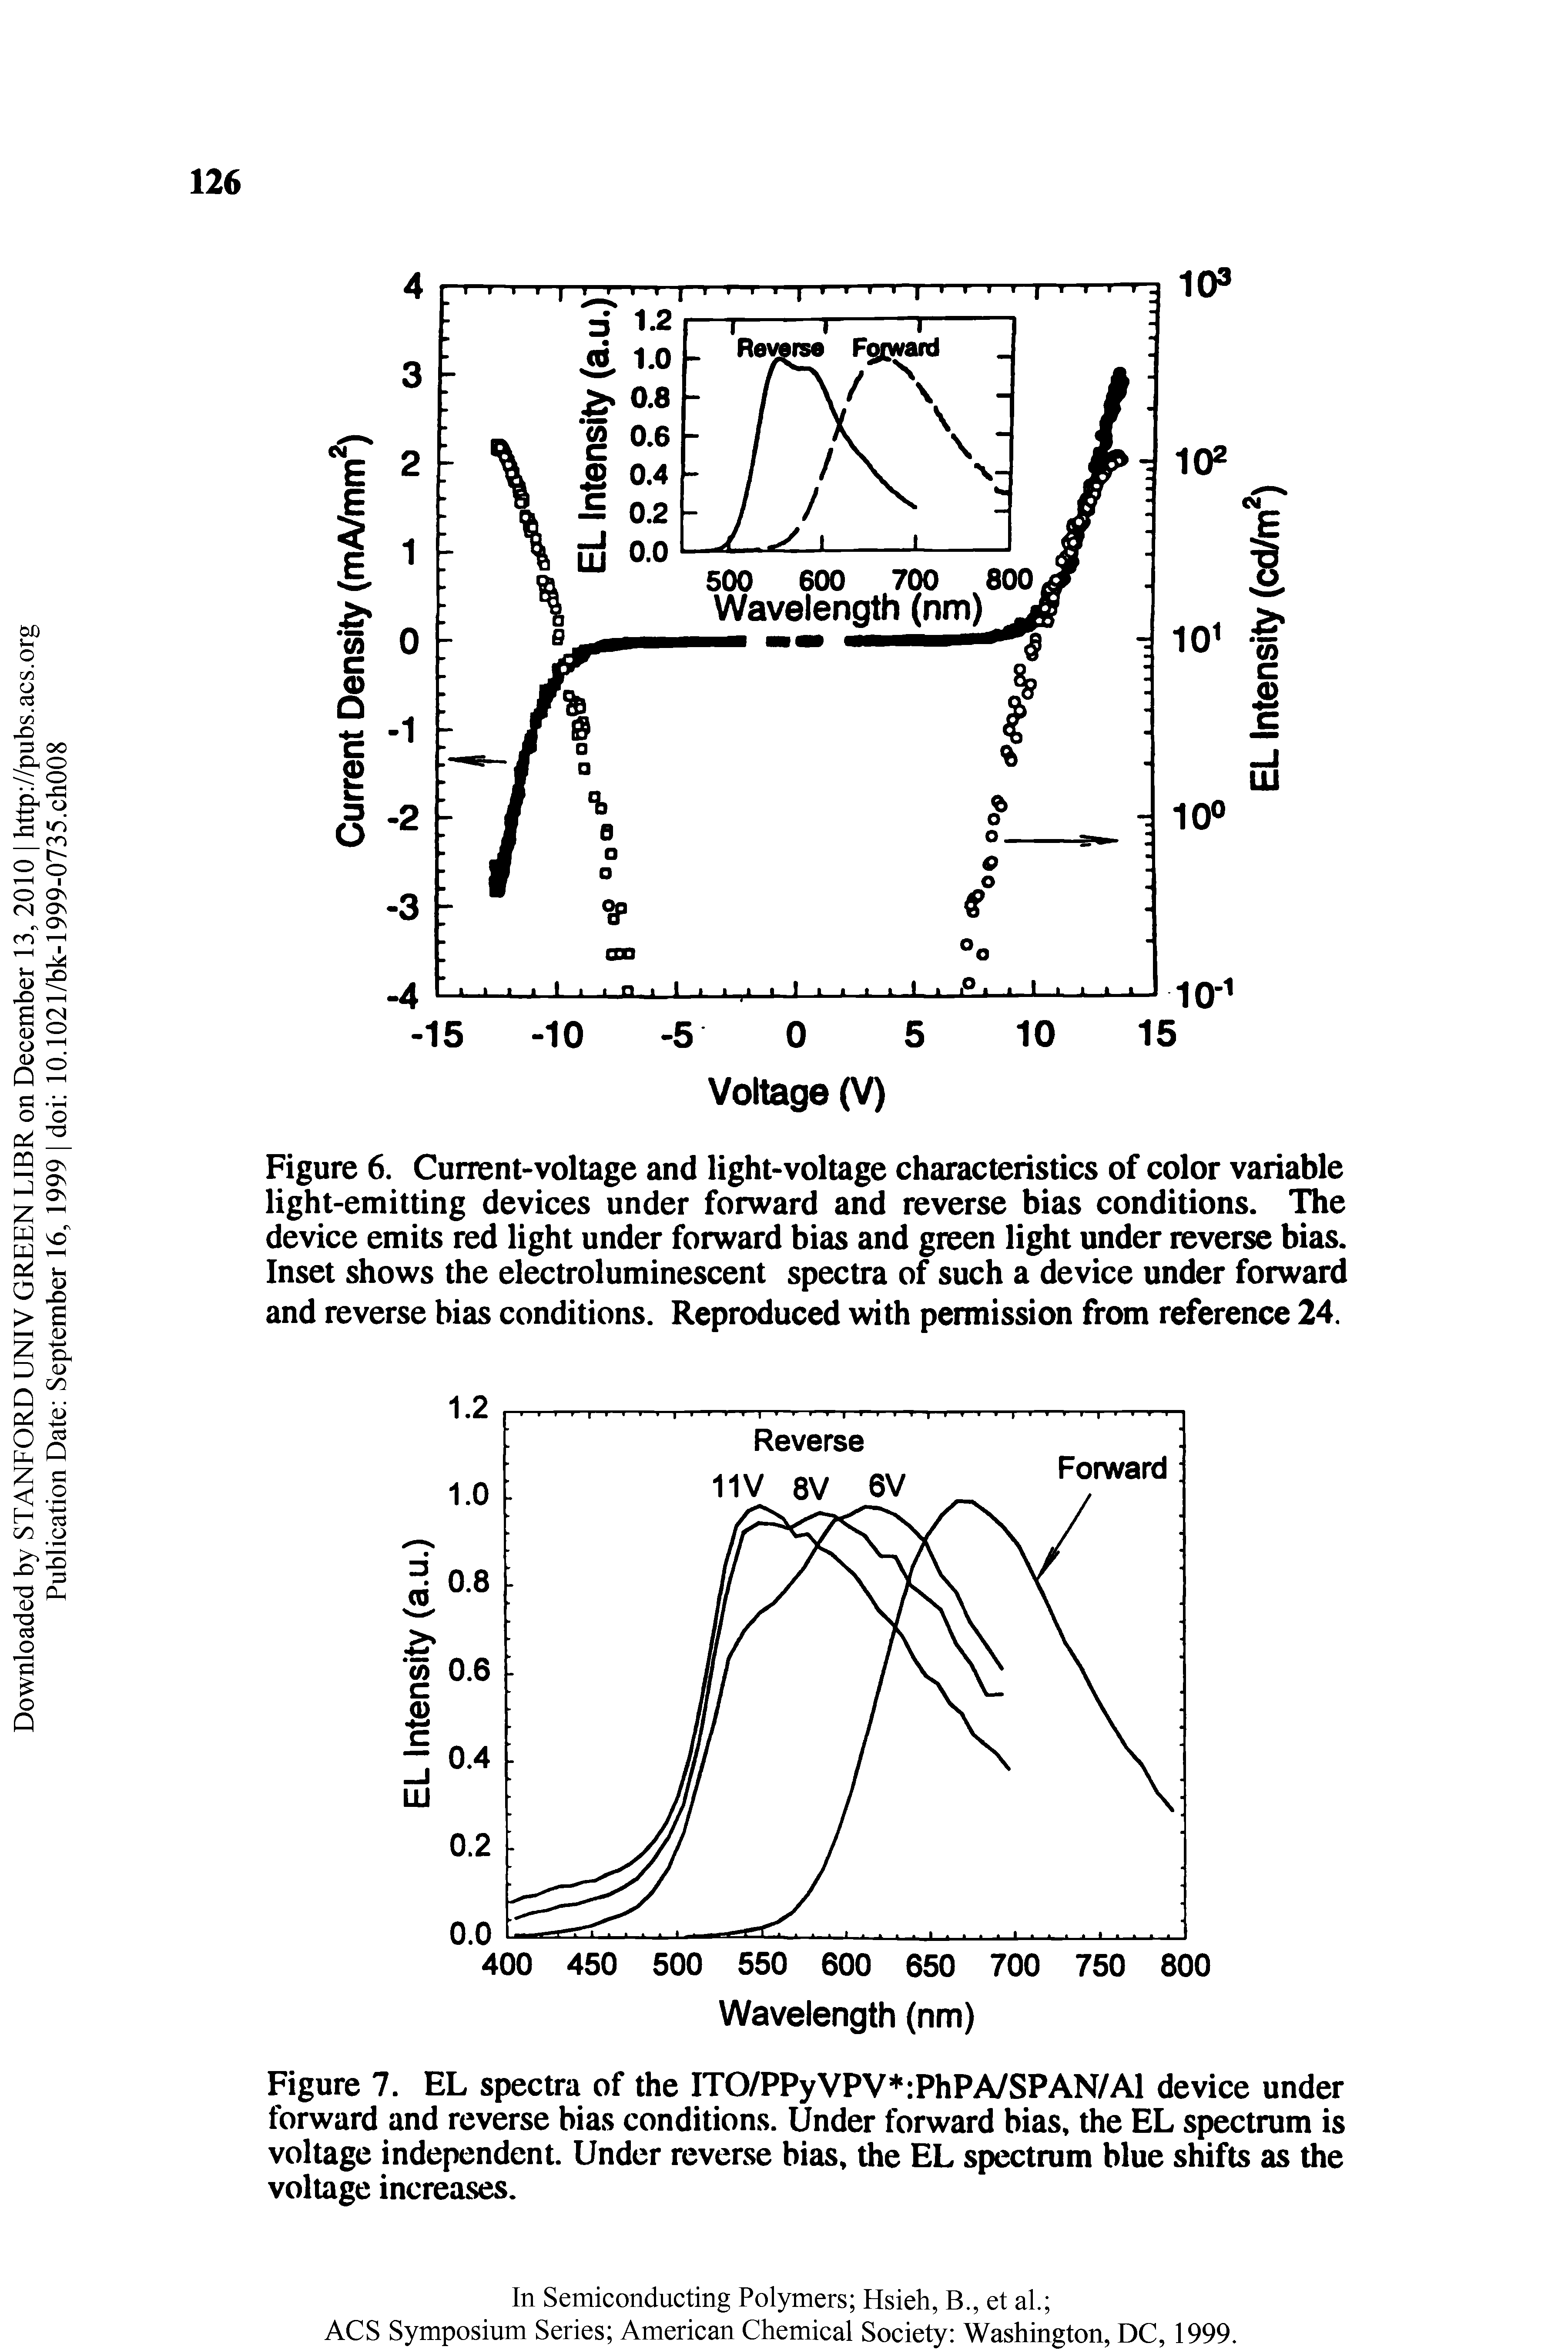 Figure 7. EL spectra of the ITO/PPyVPV PhPA/SPAN/Al device under forward and reverse bias conditions. Under forward bias, the EL spectrum is voltage independent. Under reverse bias, the EL spectrum blue shifts as the voltage increases.